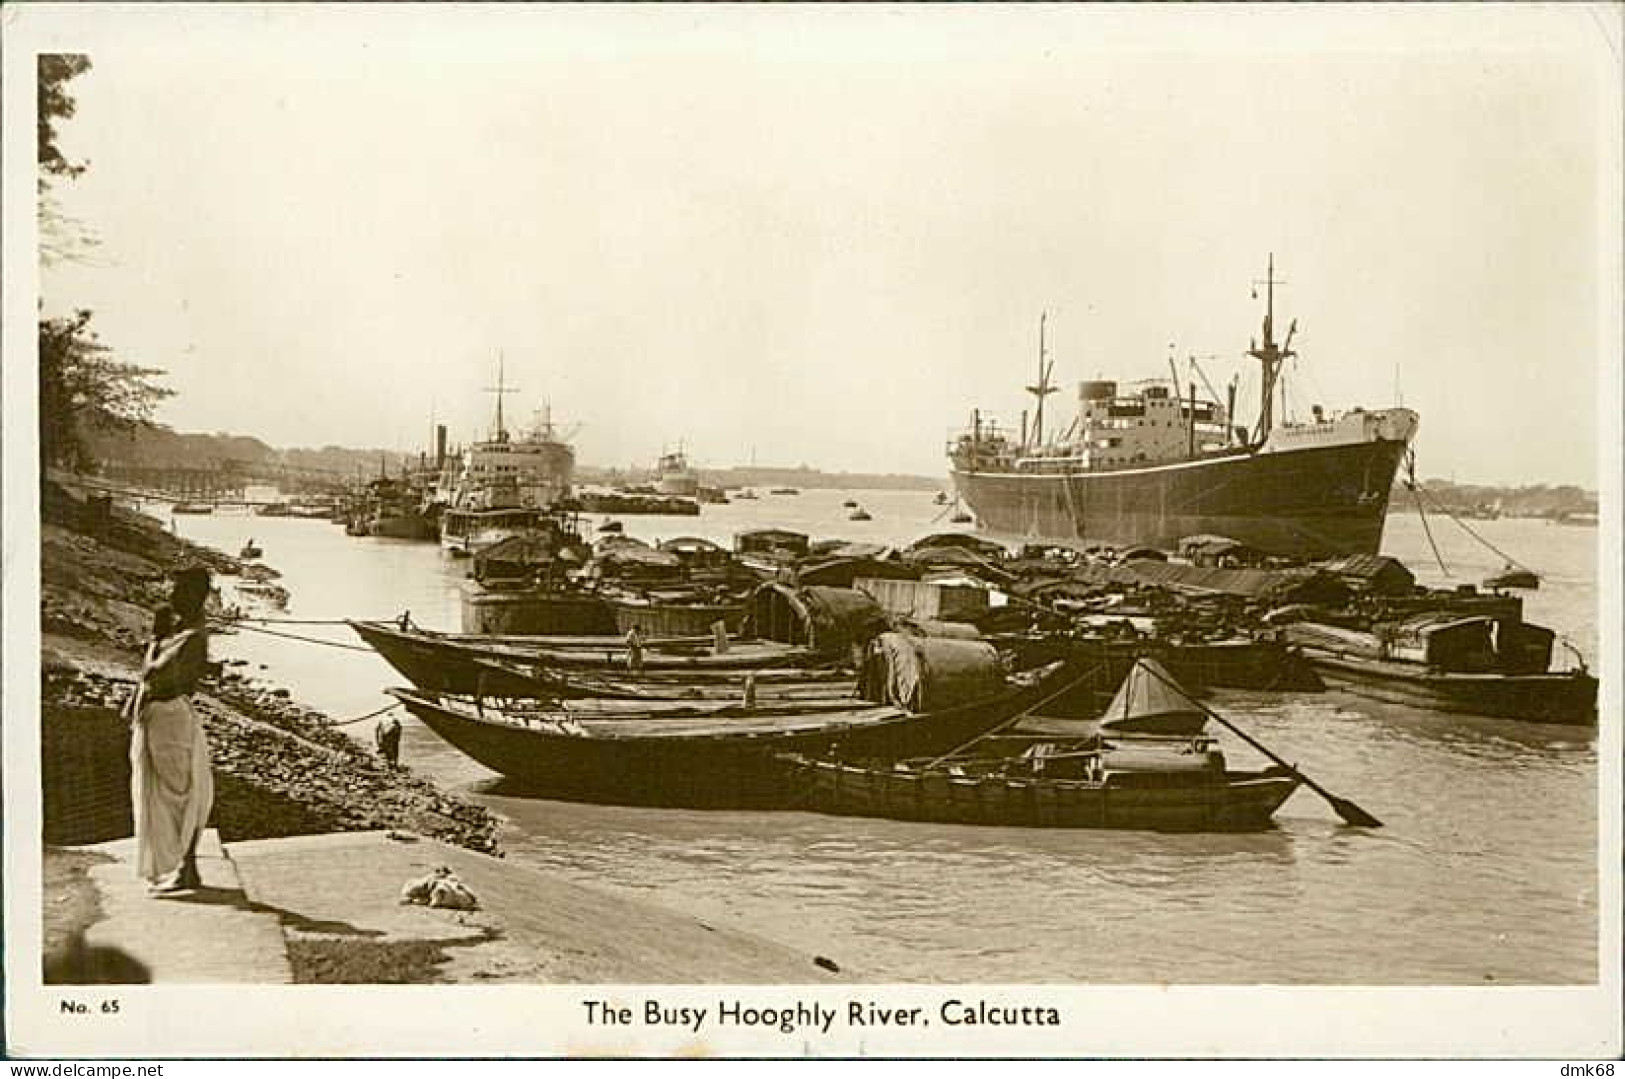 INDIA - CALCUTTA - THE BUSY HOOGLY RIVER - COPYRIGHT BOMBAY PHOTO STORES LTD - 1930s  (18377) - India